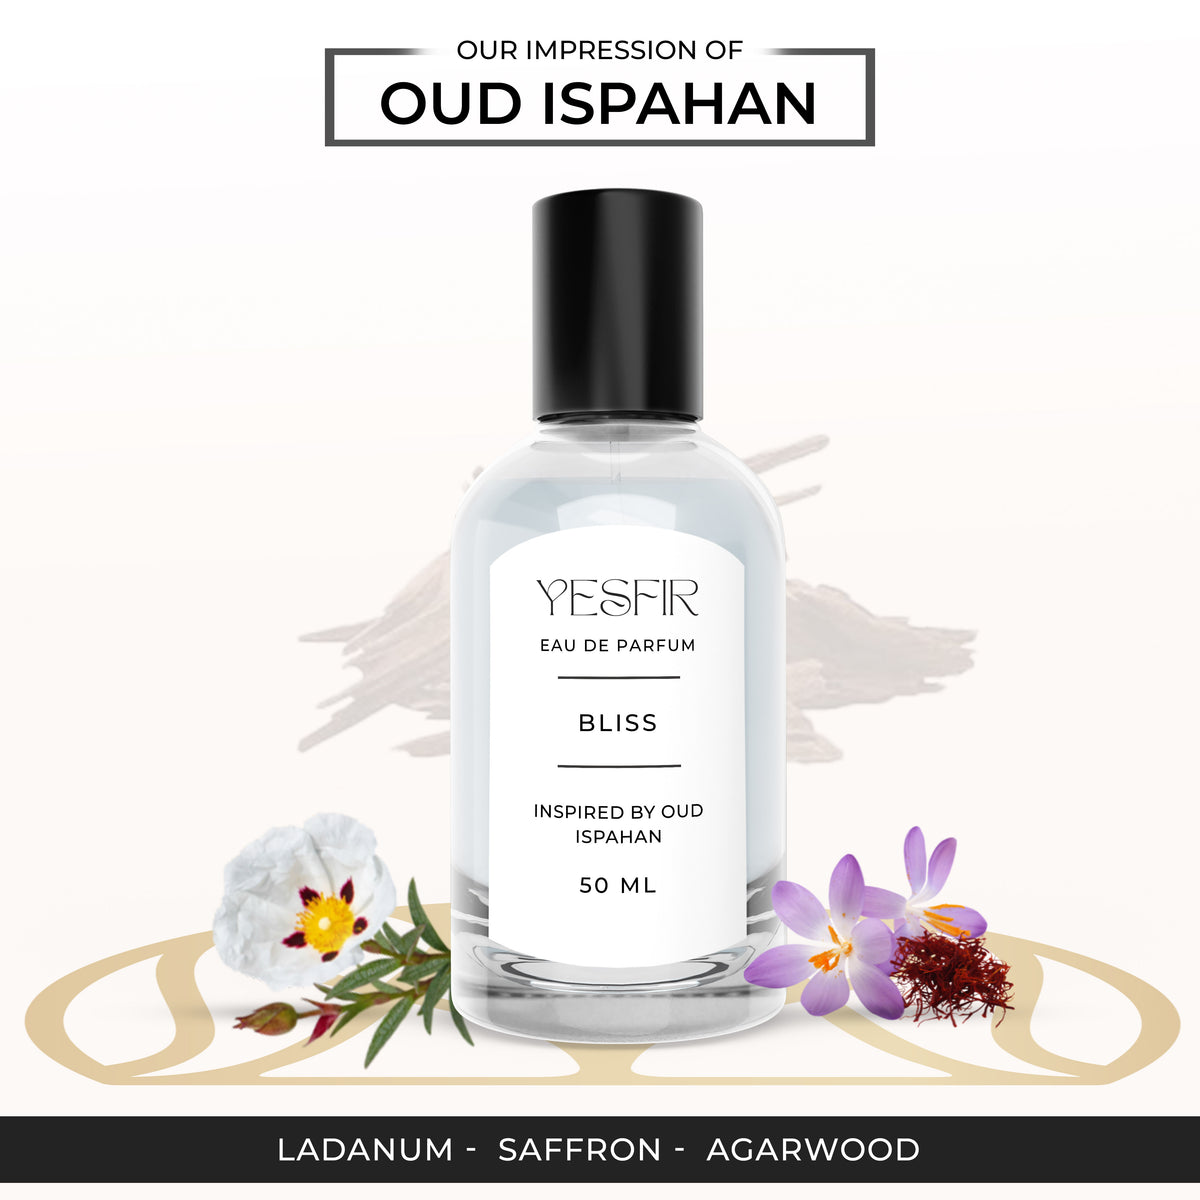 Bliss - Inspired by Oud Ispahan